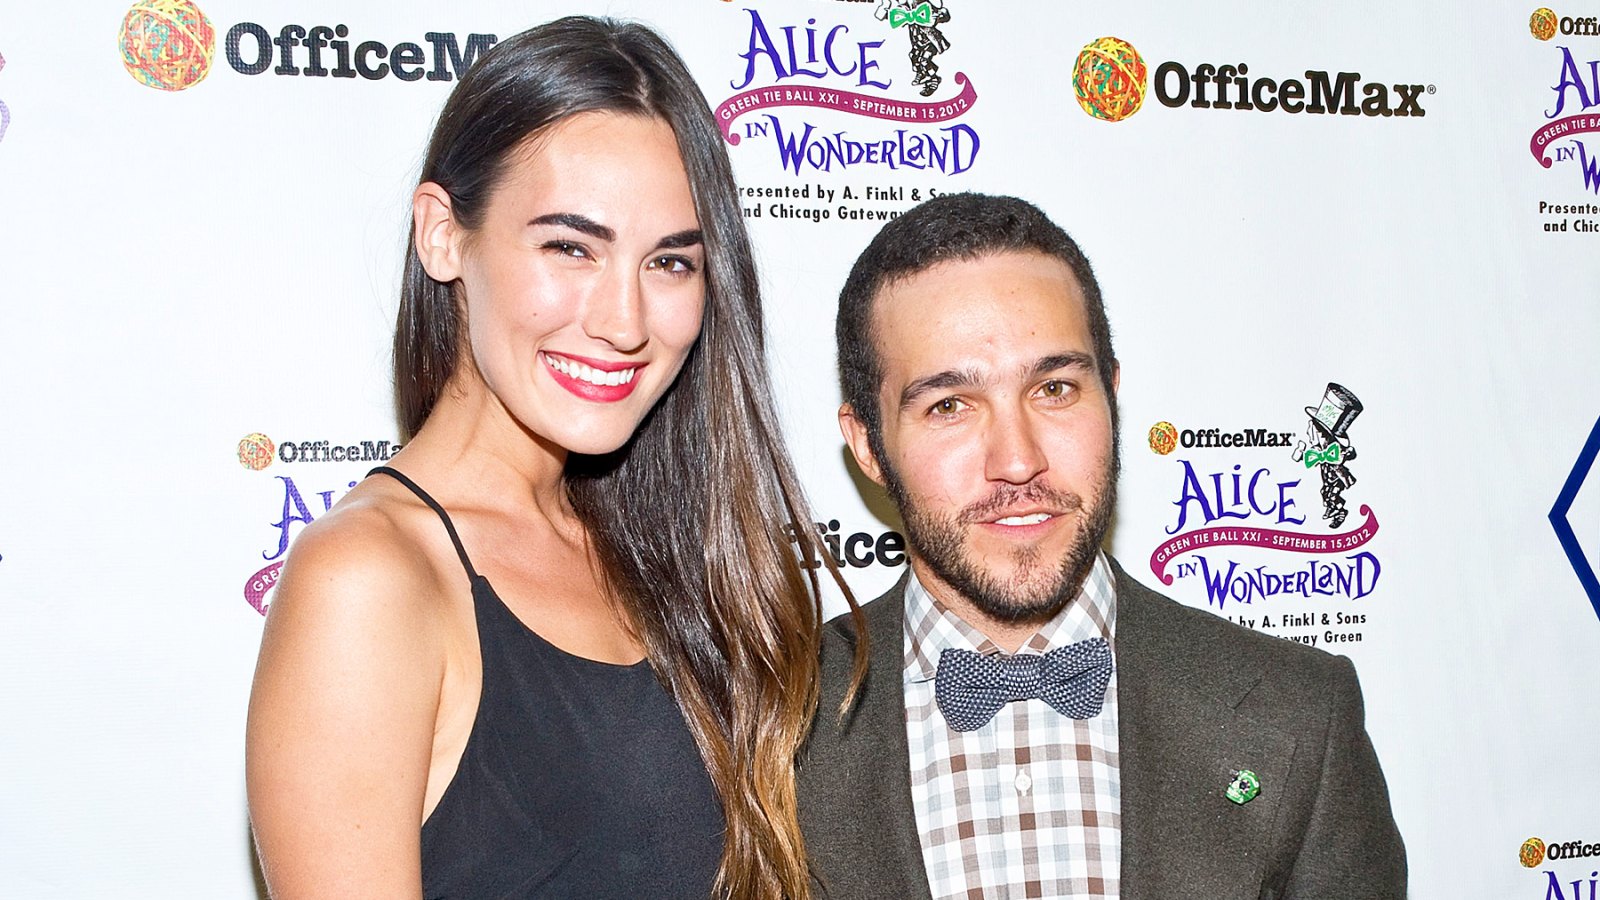 Meagan Camper and Pete Wentz attend the Green Tie Ball XXI Benefiting Chicago Gateway Green at A. Finkl & Sons in Chicago, Illinois.